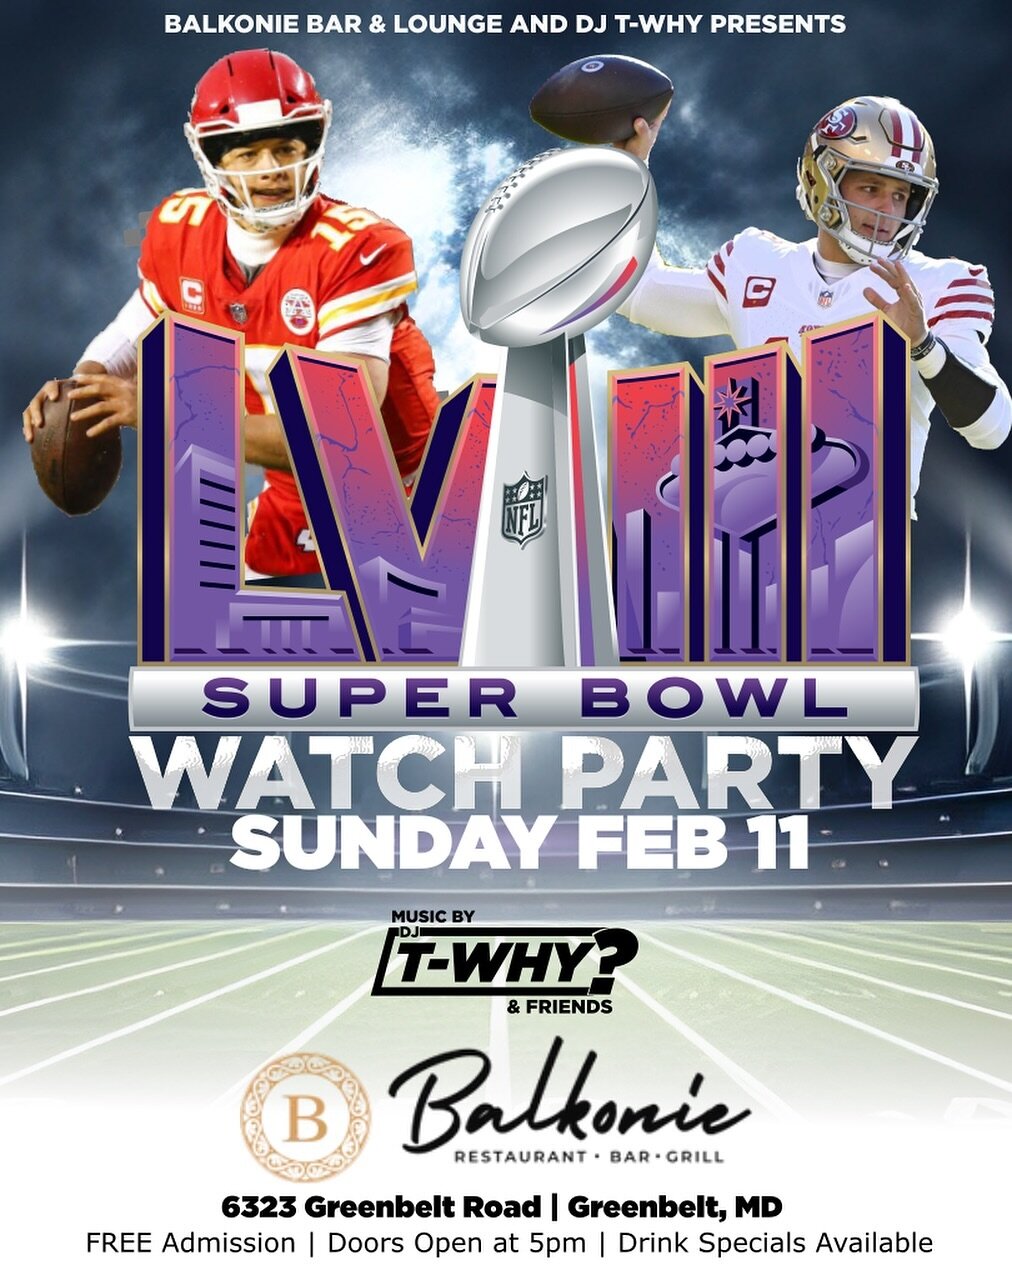 IT&rsquo;S GAME DAY!!! Meet me at Balkonie! 

📅 Date: Feb 11

⏰ Time: Starting at 5pm

📍 Location: Location: Balkonie Bar and Lounge, Greenbelt Road, Berwyn Heights, MD
@balkonie_restaurant 

🎟️ Entry: FREE (of course)

superbowlkickback.eventbrit